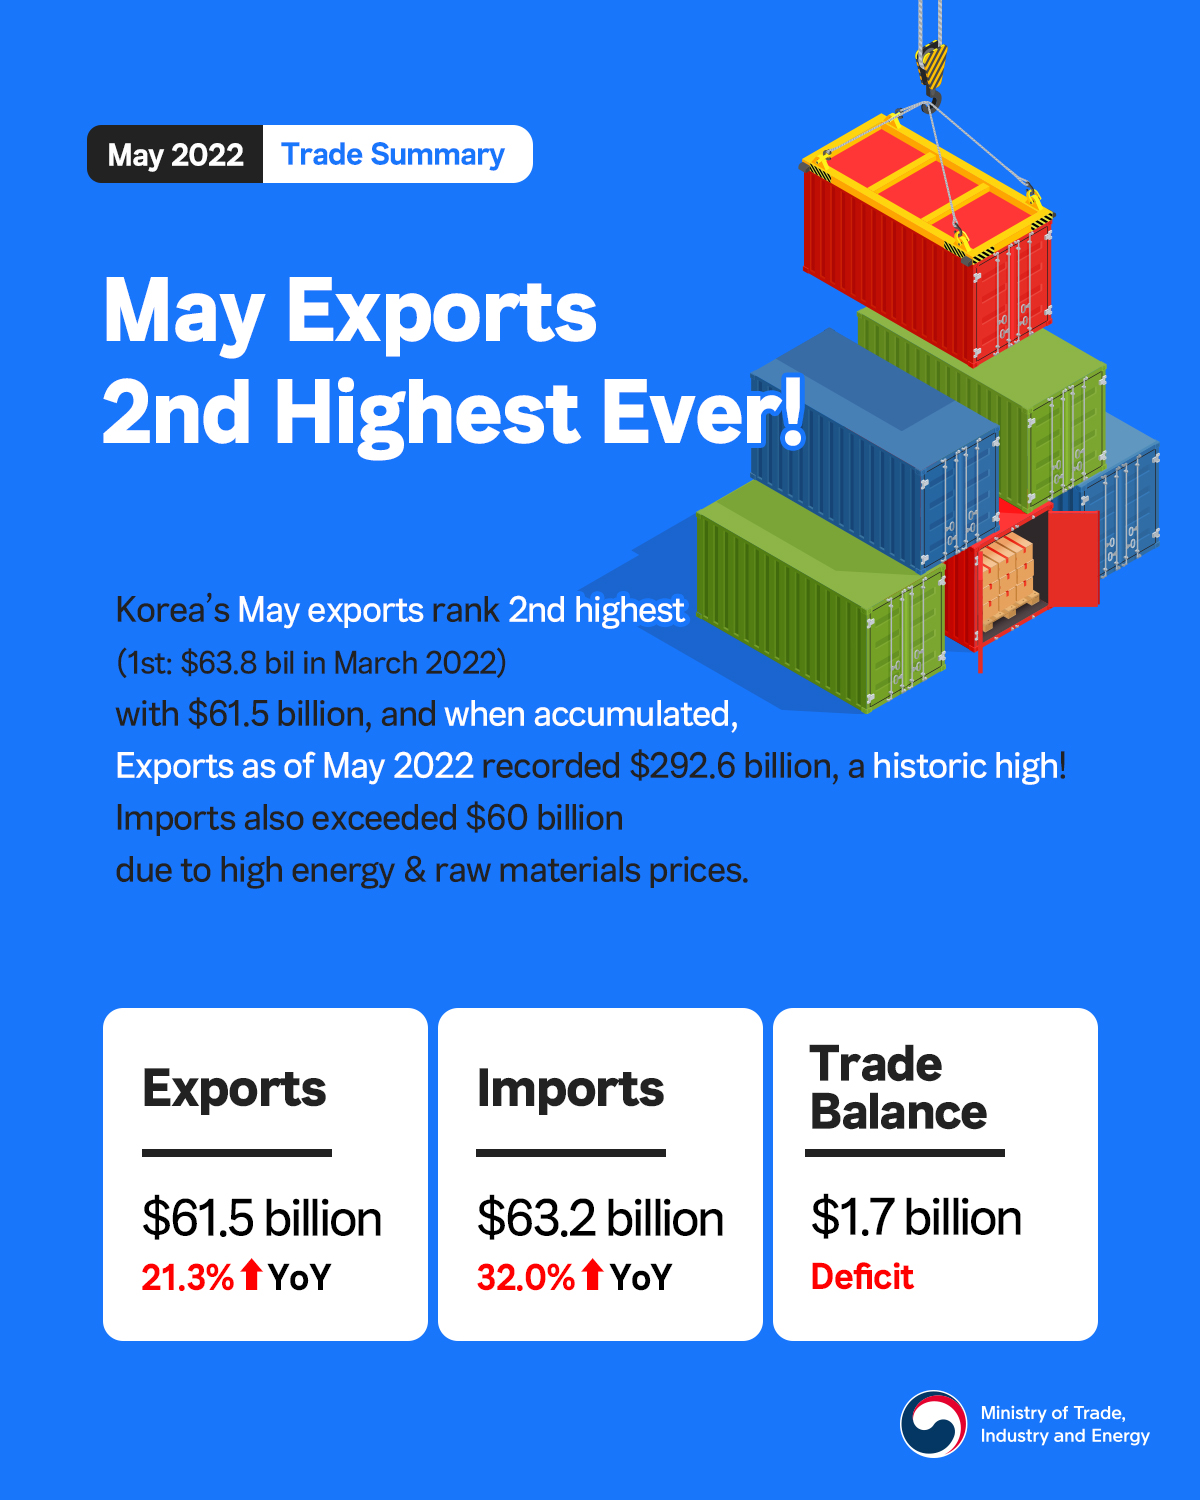 May exports record 2nd highest ever!